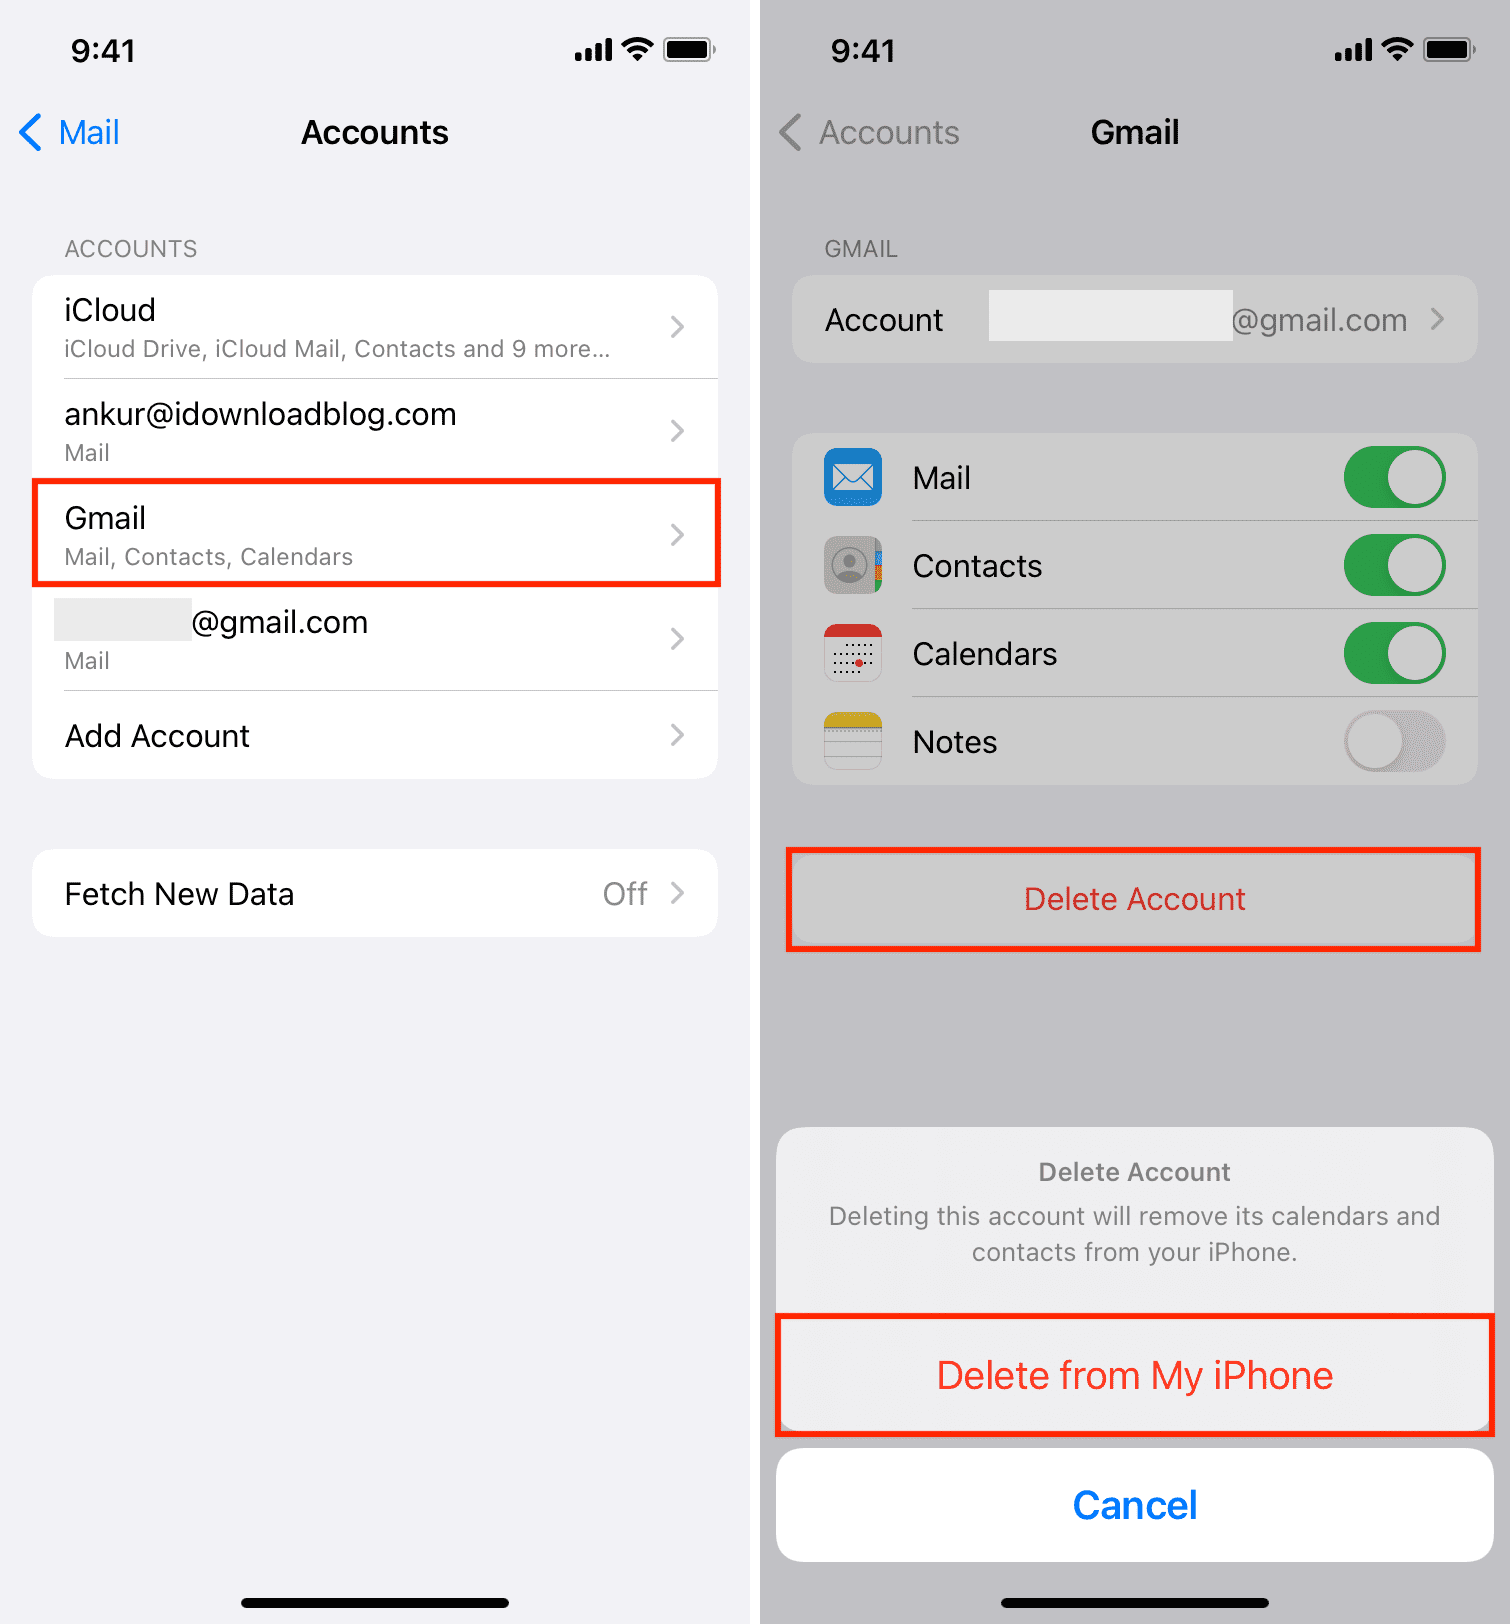 Delete from My iPhone for Google in iPhone settings